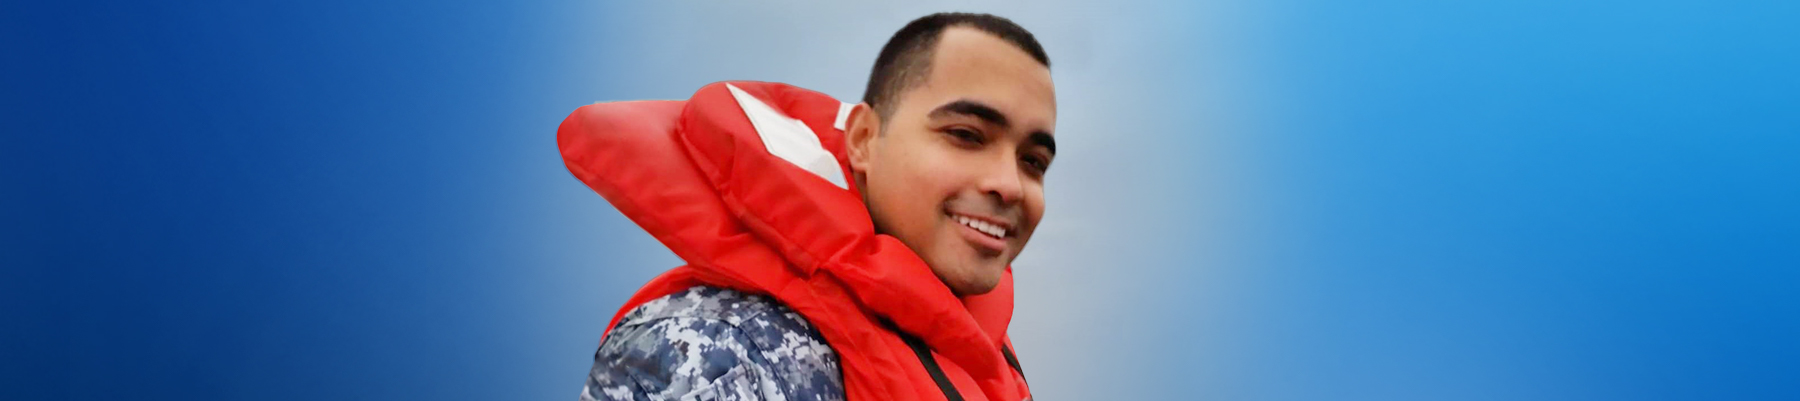 Photo of Alex wearing a military uniform and life vest, looking to the camera smiling.